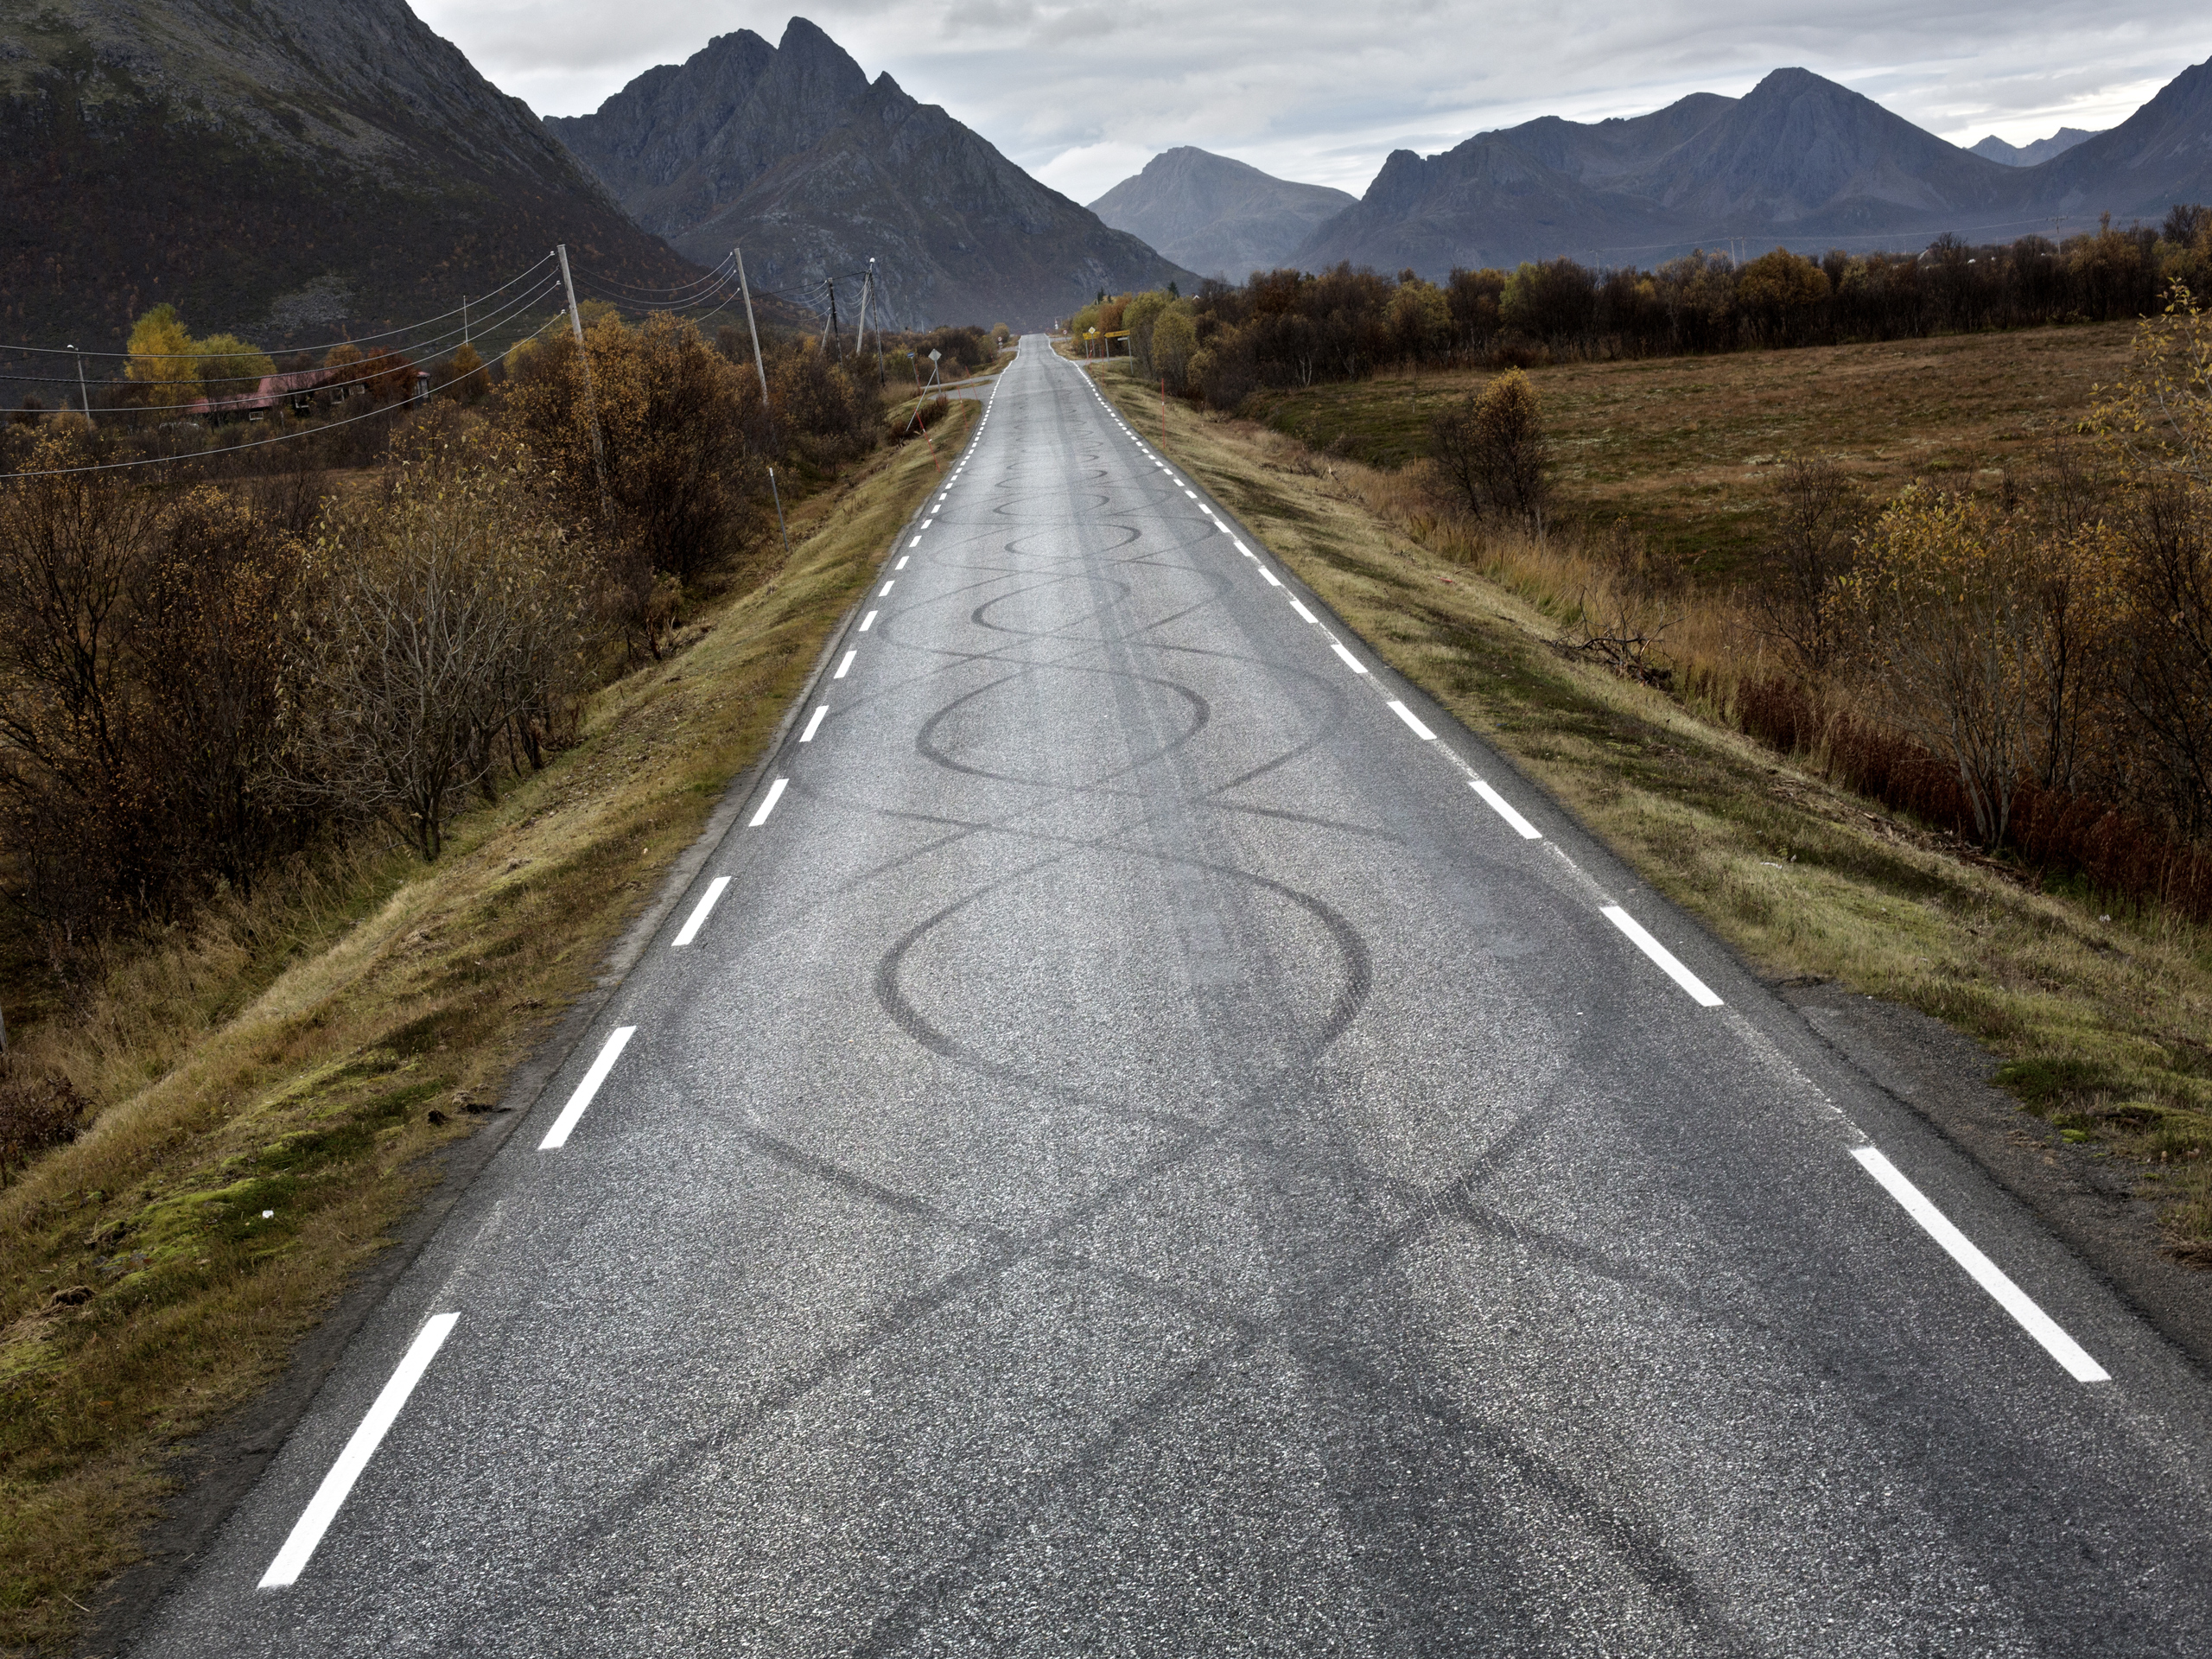 Rubber tire skidmarks form artistic figure-8s on the road out from Myre. Myre is home to many car enthusiasts. 2012, Vesterålen, Norway.